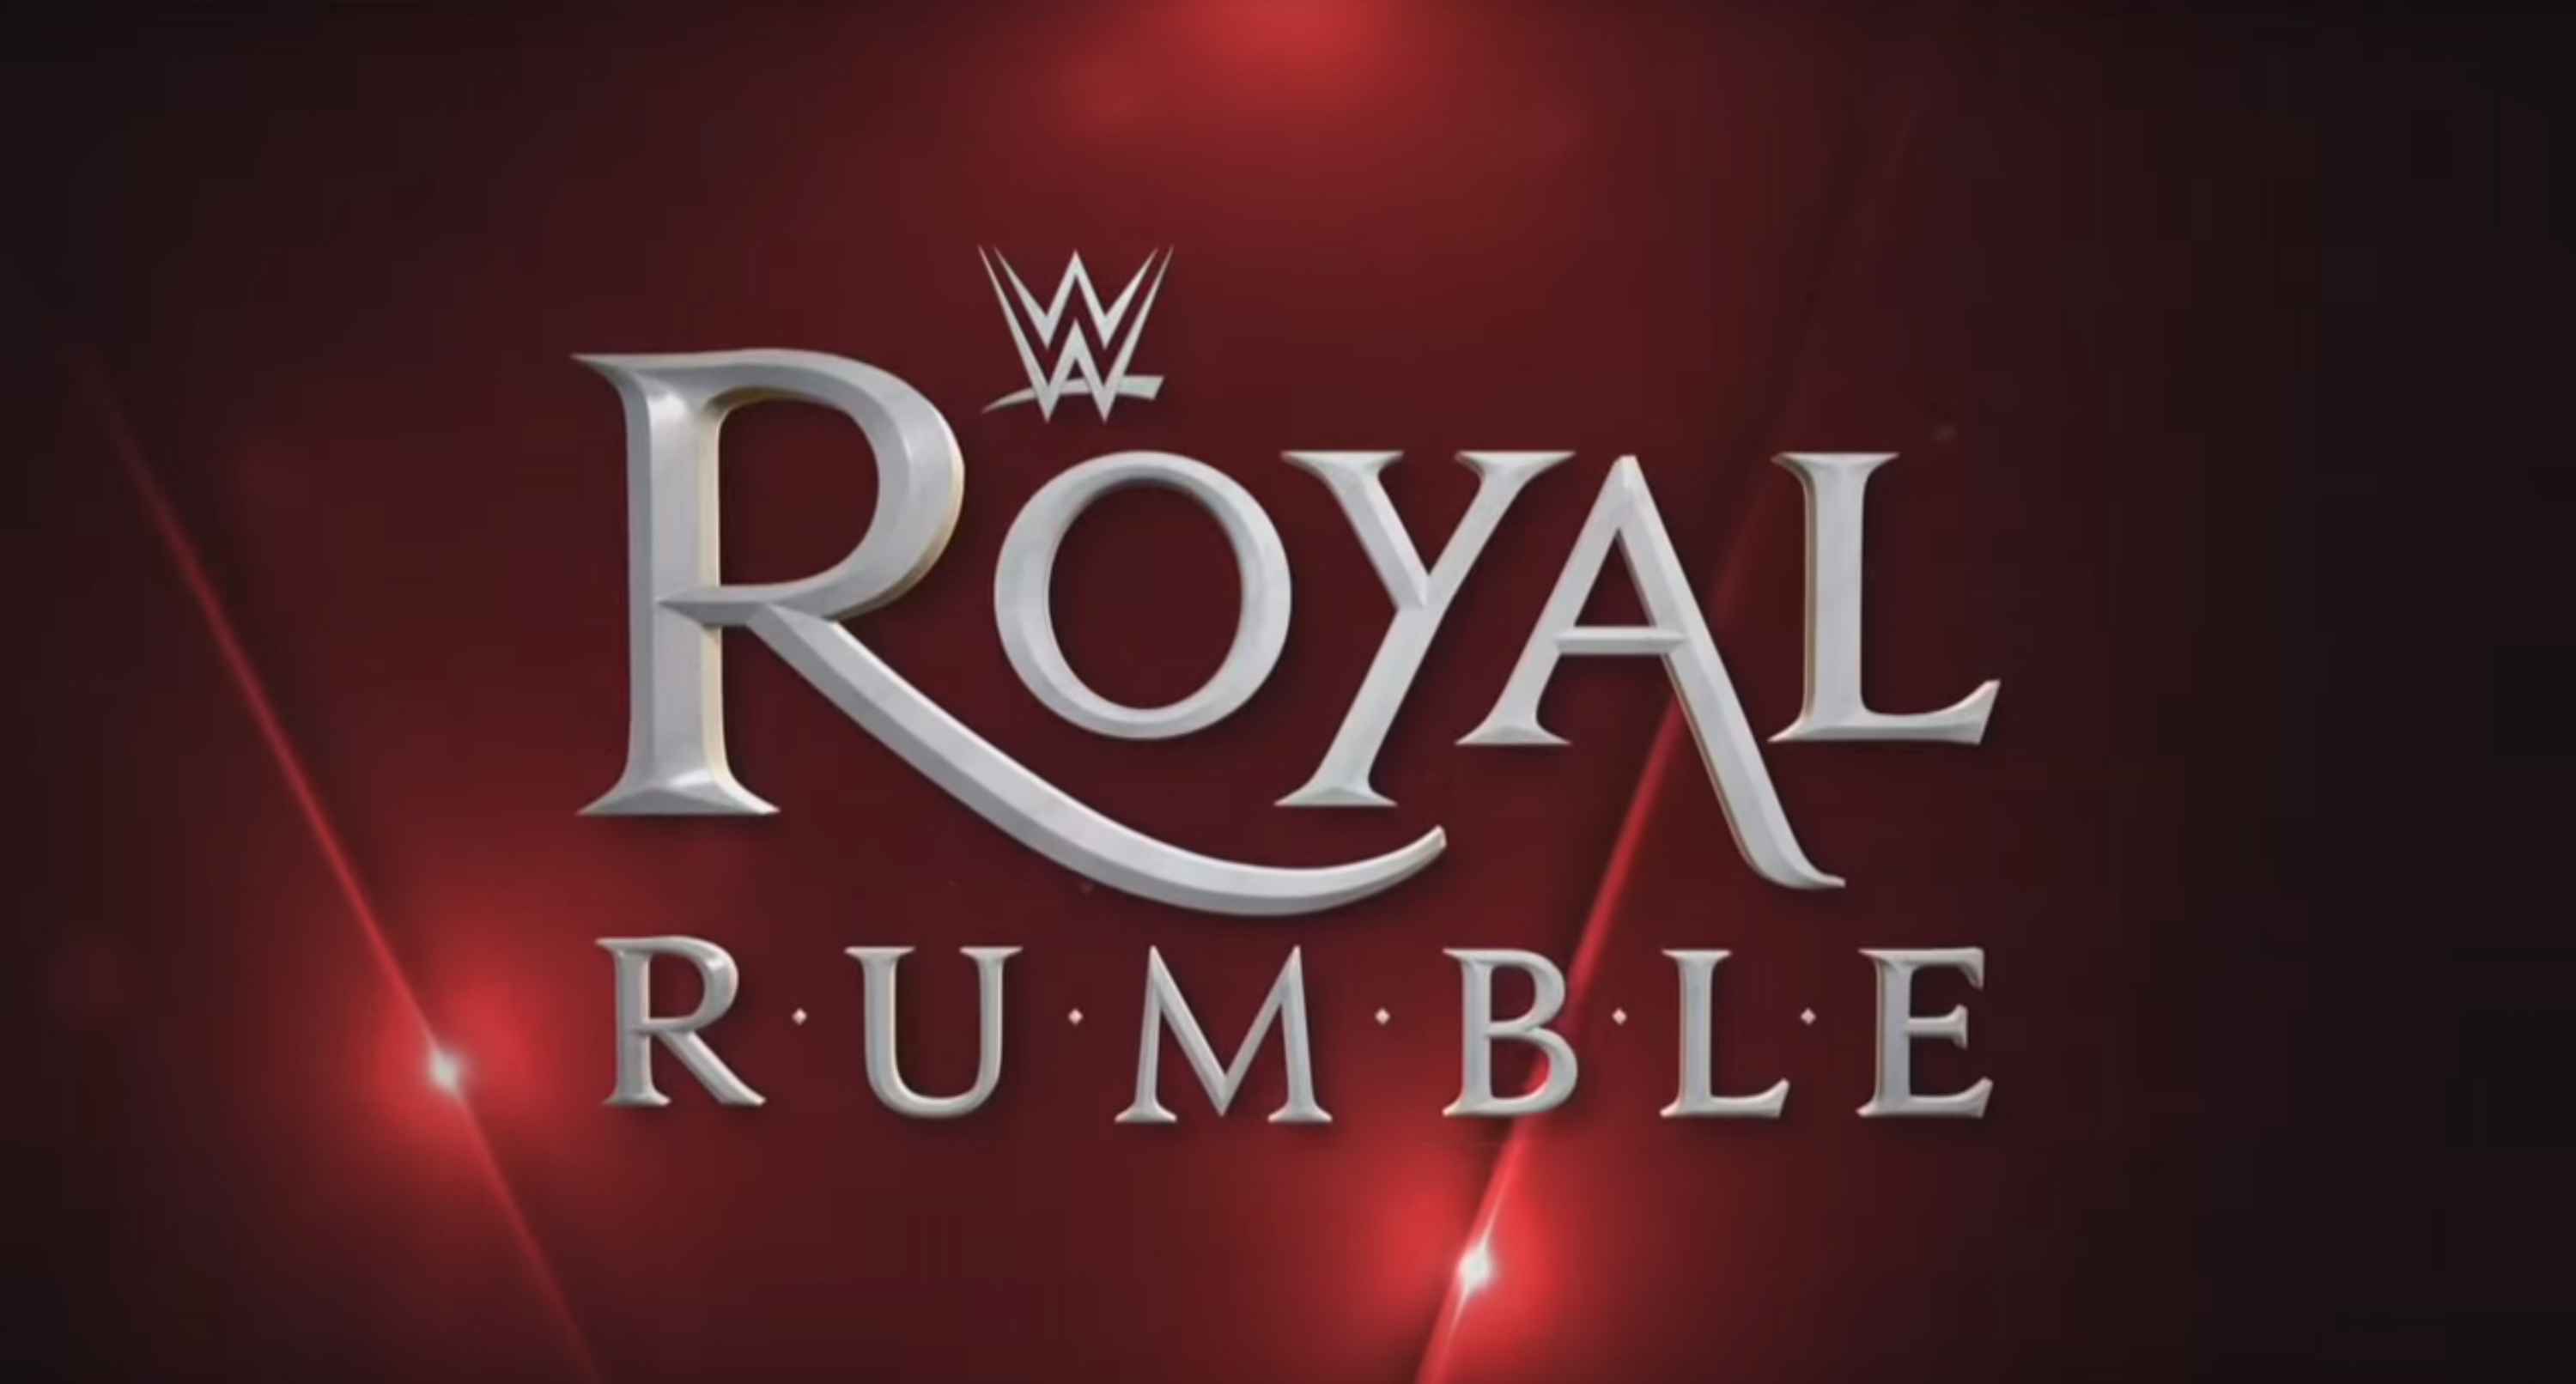 Archived: WWE Royal Rumble 2016 Predictions - archived